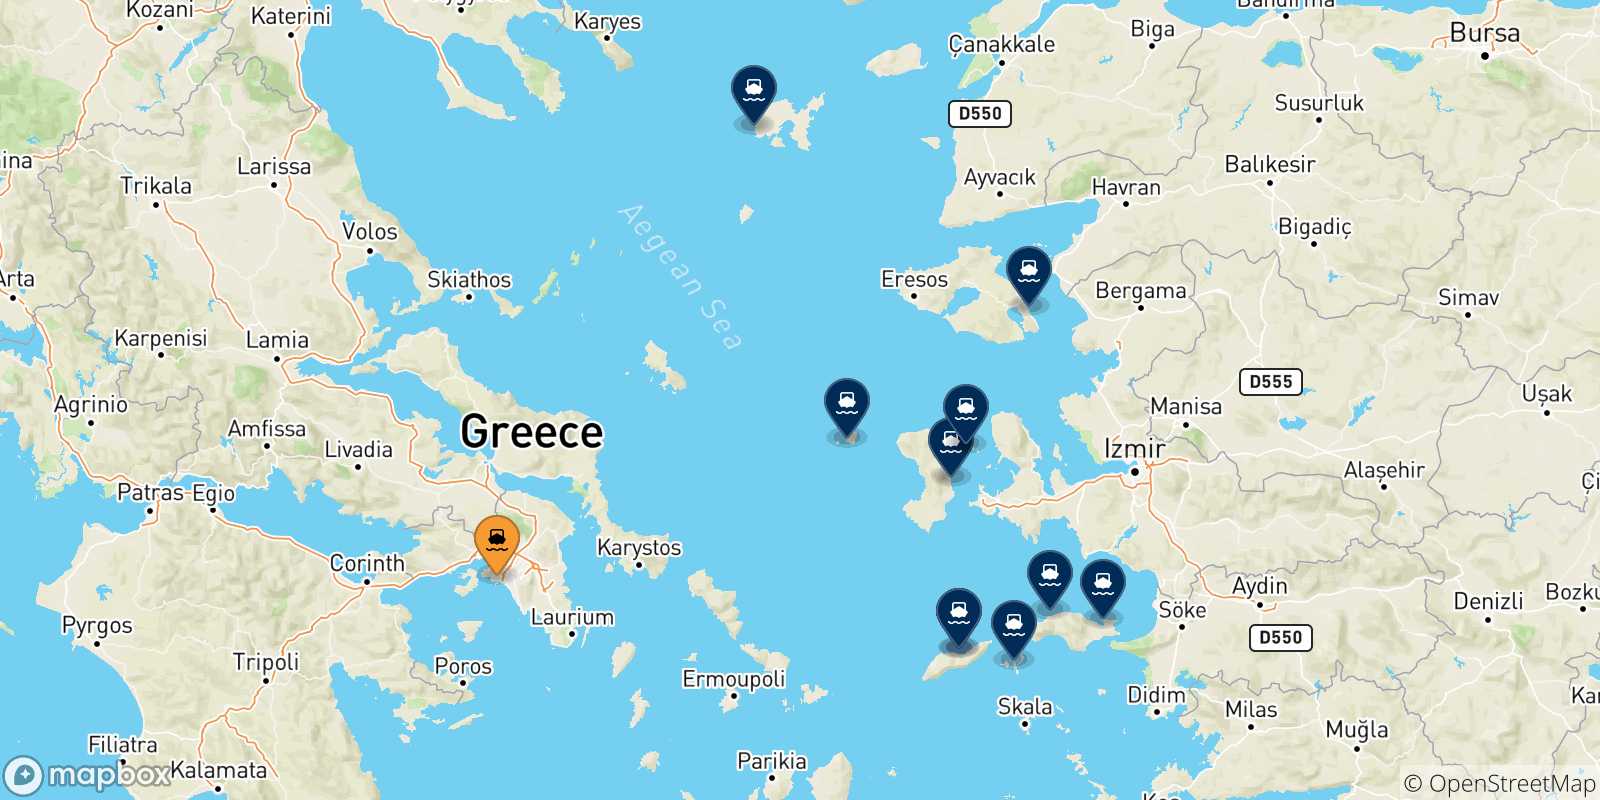 Map of the possible routes between Piraeus and Aegean Islands